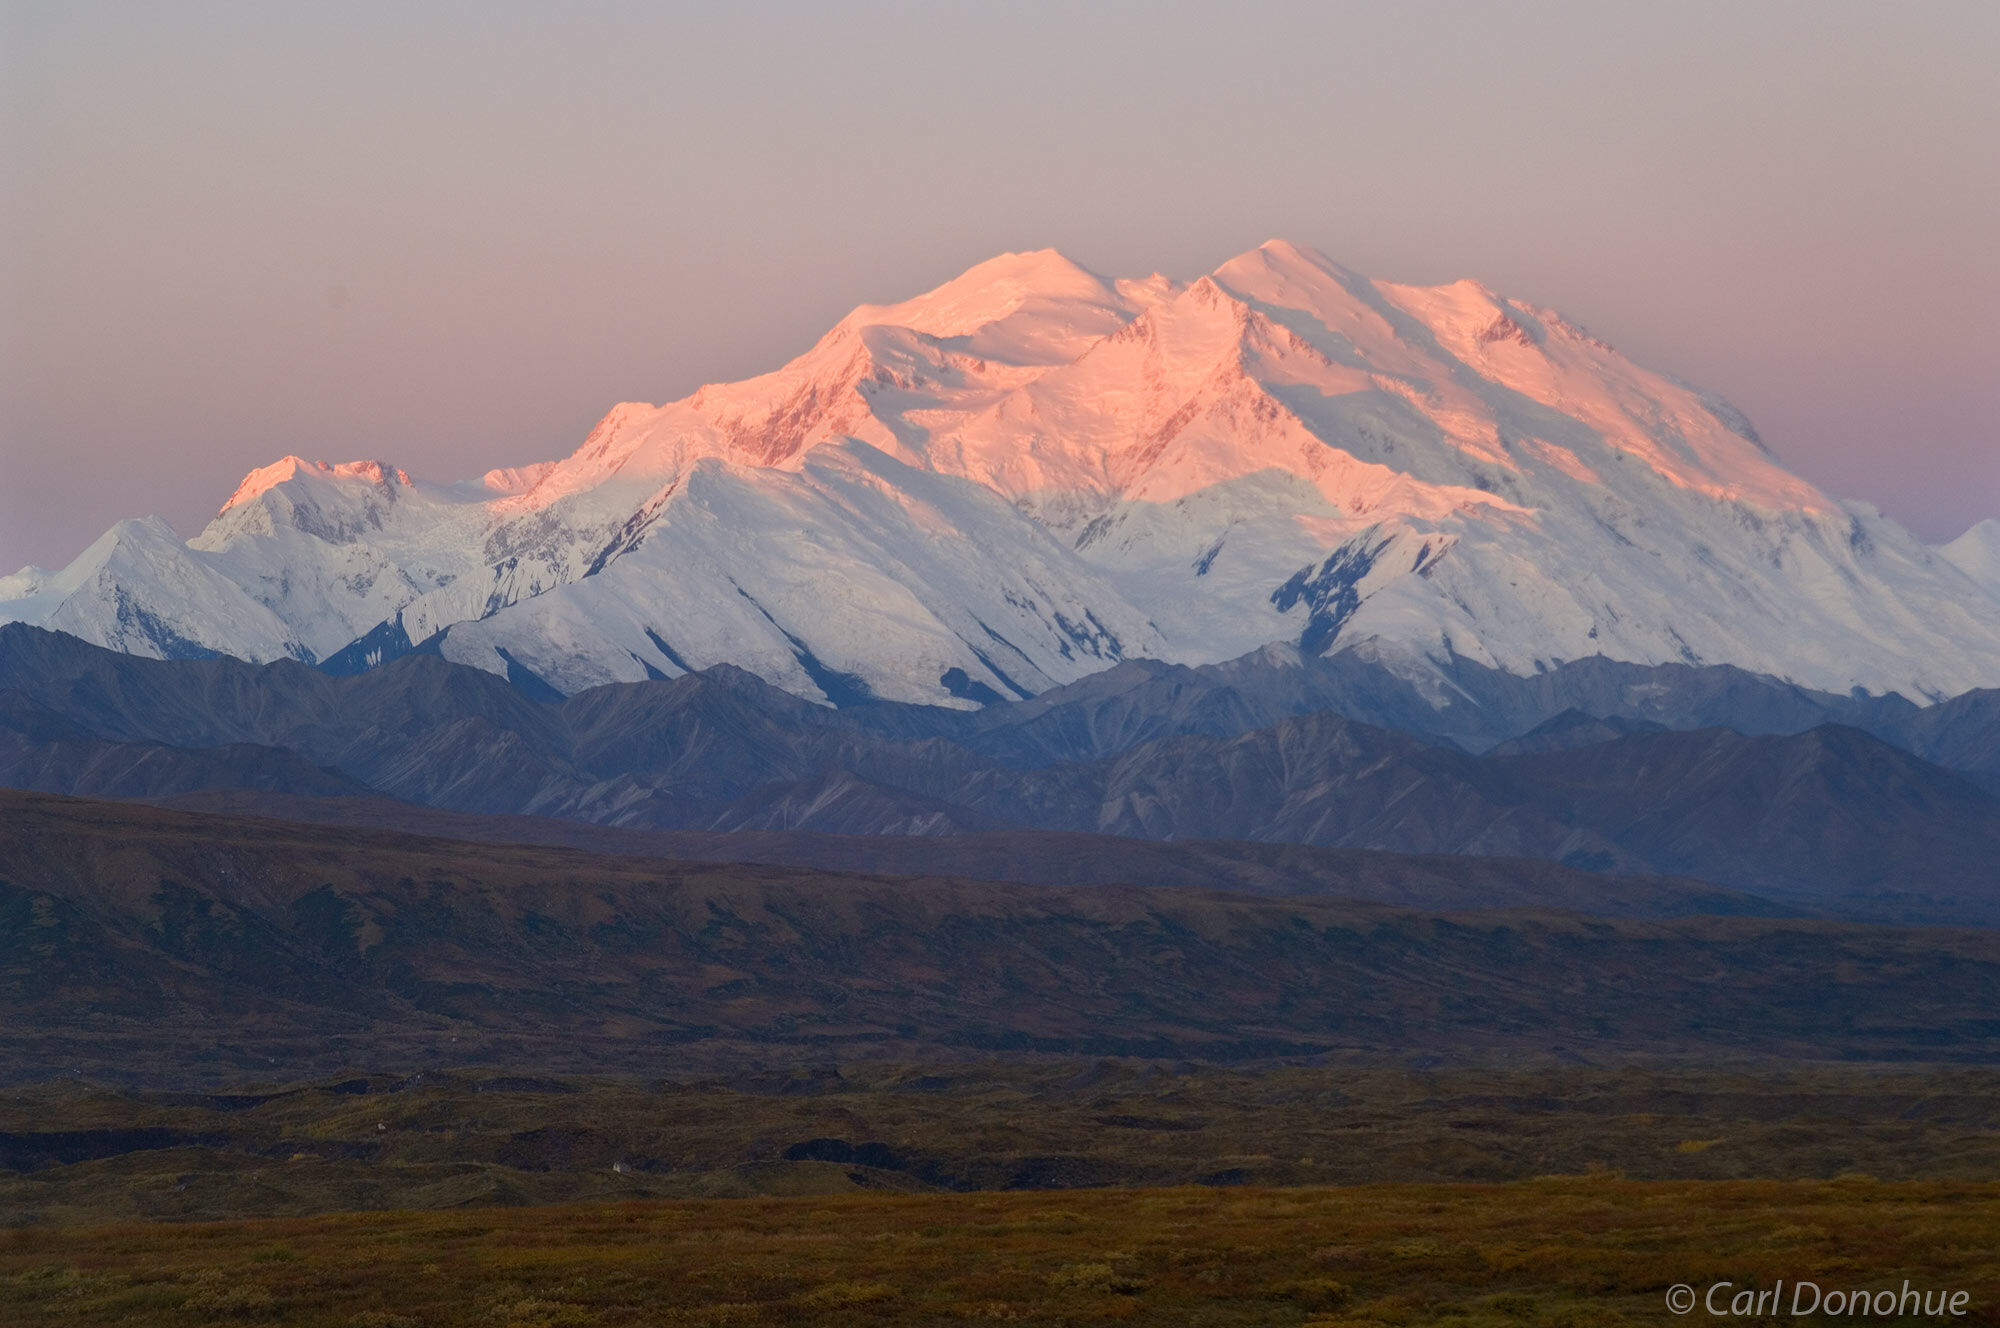 First lawn of dawn alpenglow catches the 20 000' peak of Mount Denali in Denali National Park and Preserve, Alaska.